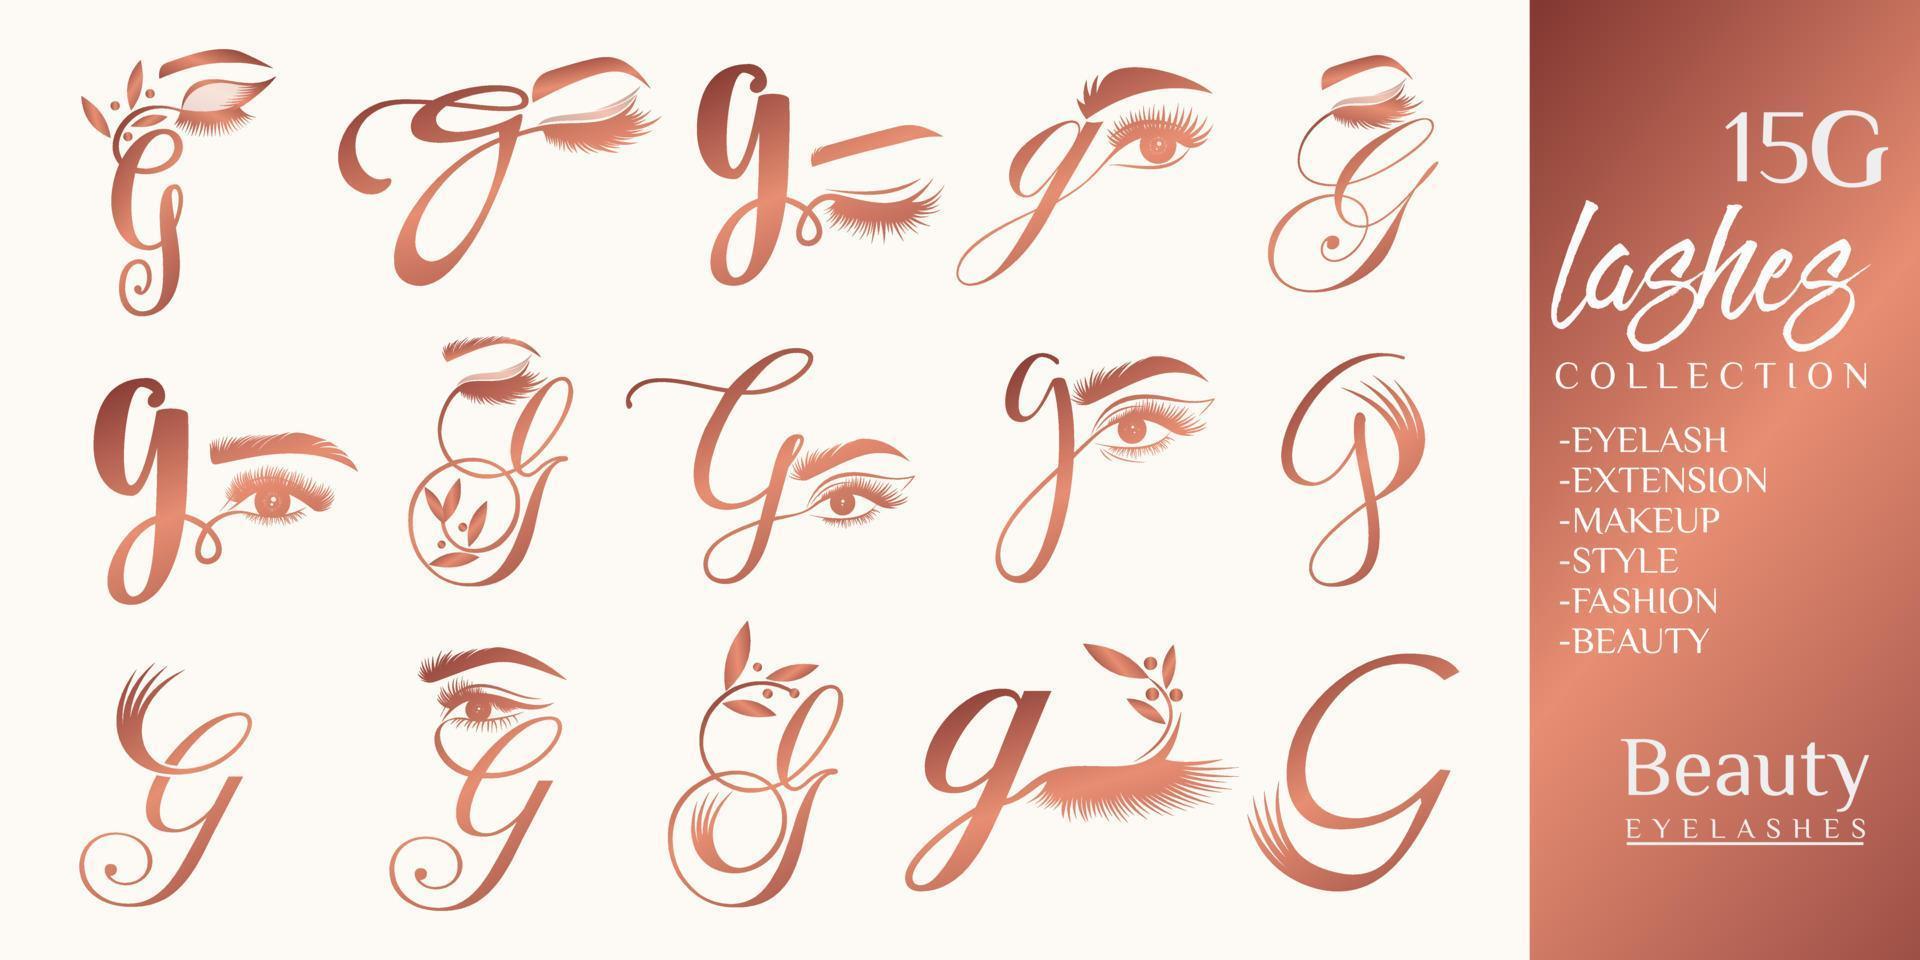 Eyelashes logo with letter G concept vector